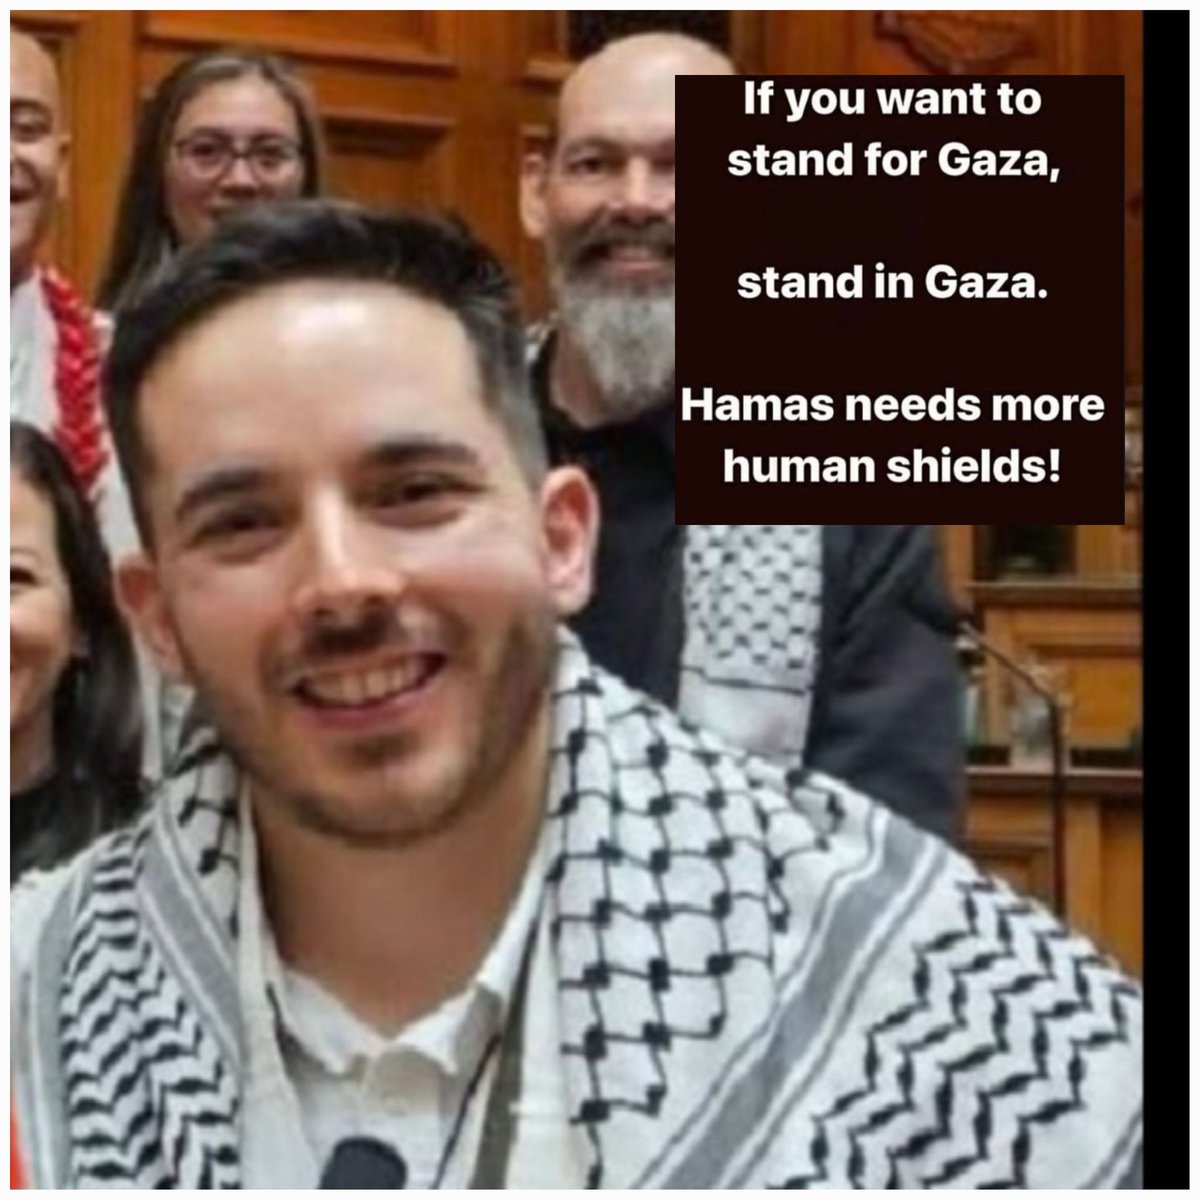 Completely whacko Marxist.
Brainwashes Aussie kids into believing the lies of #Hamas 
He should be sacked from the @Sydney_Uni for anti Semitism.
A middleclass intellectual who sits here in a Democracy and has not got the balls to piss off to Gaza.